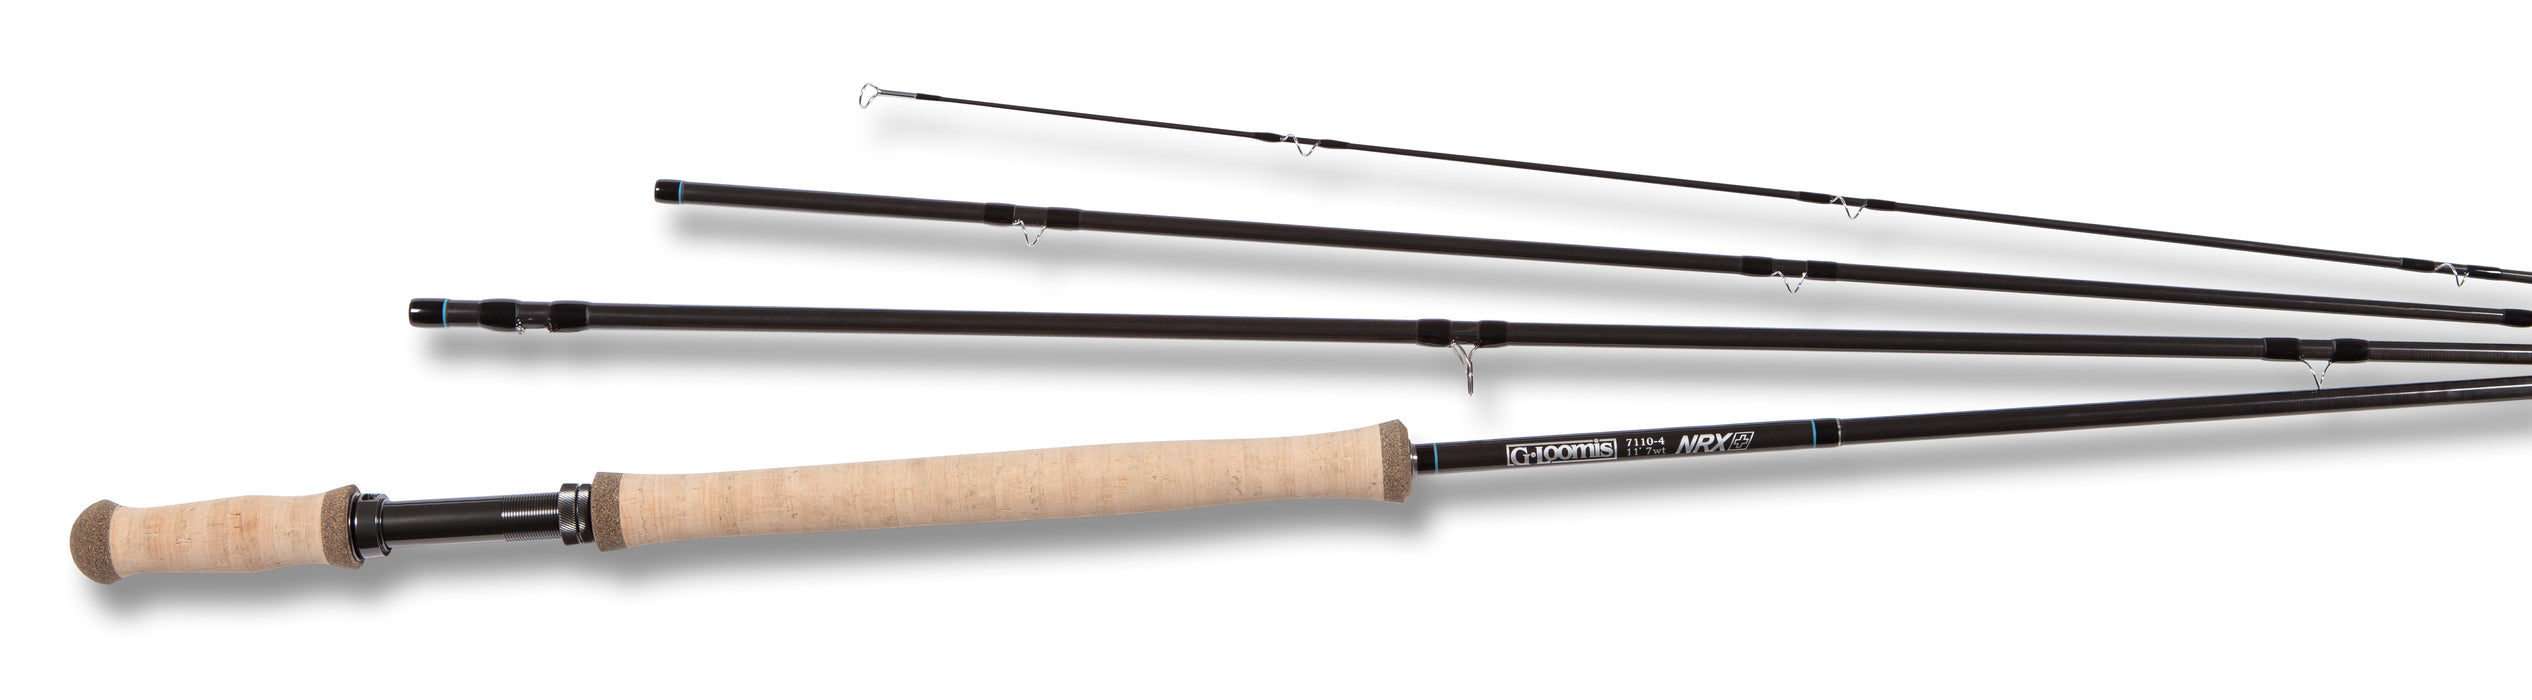 g loomis nrx+ switch rods